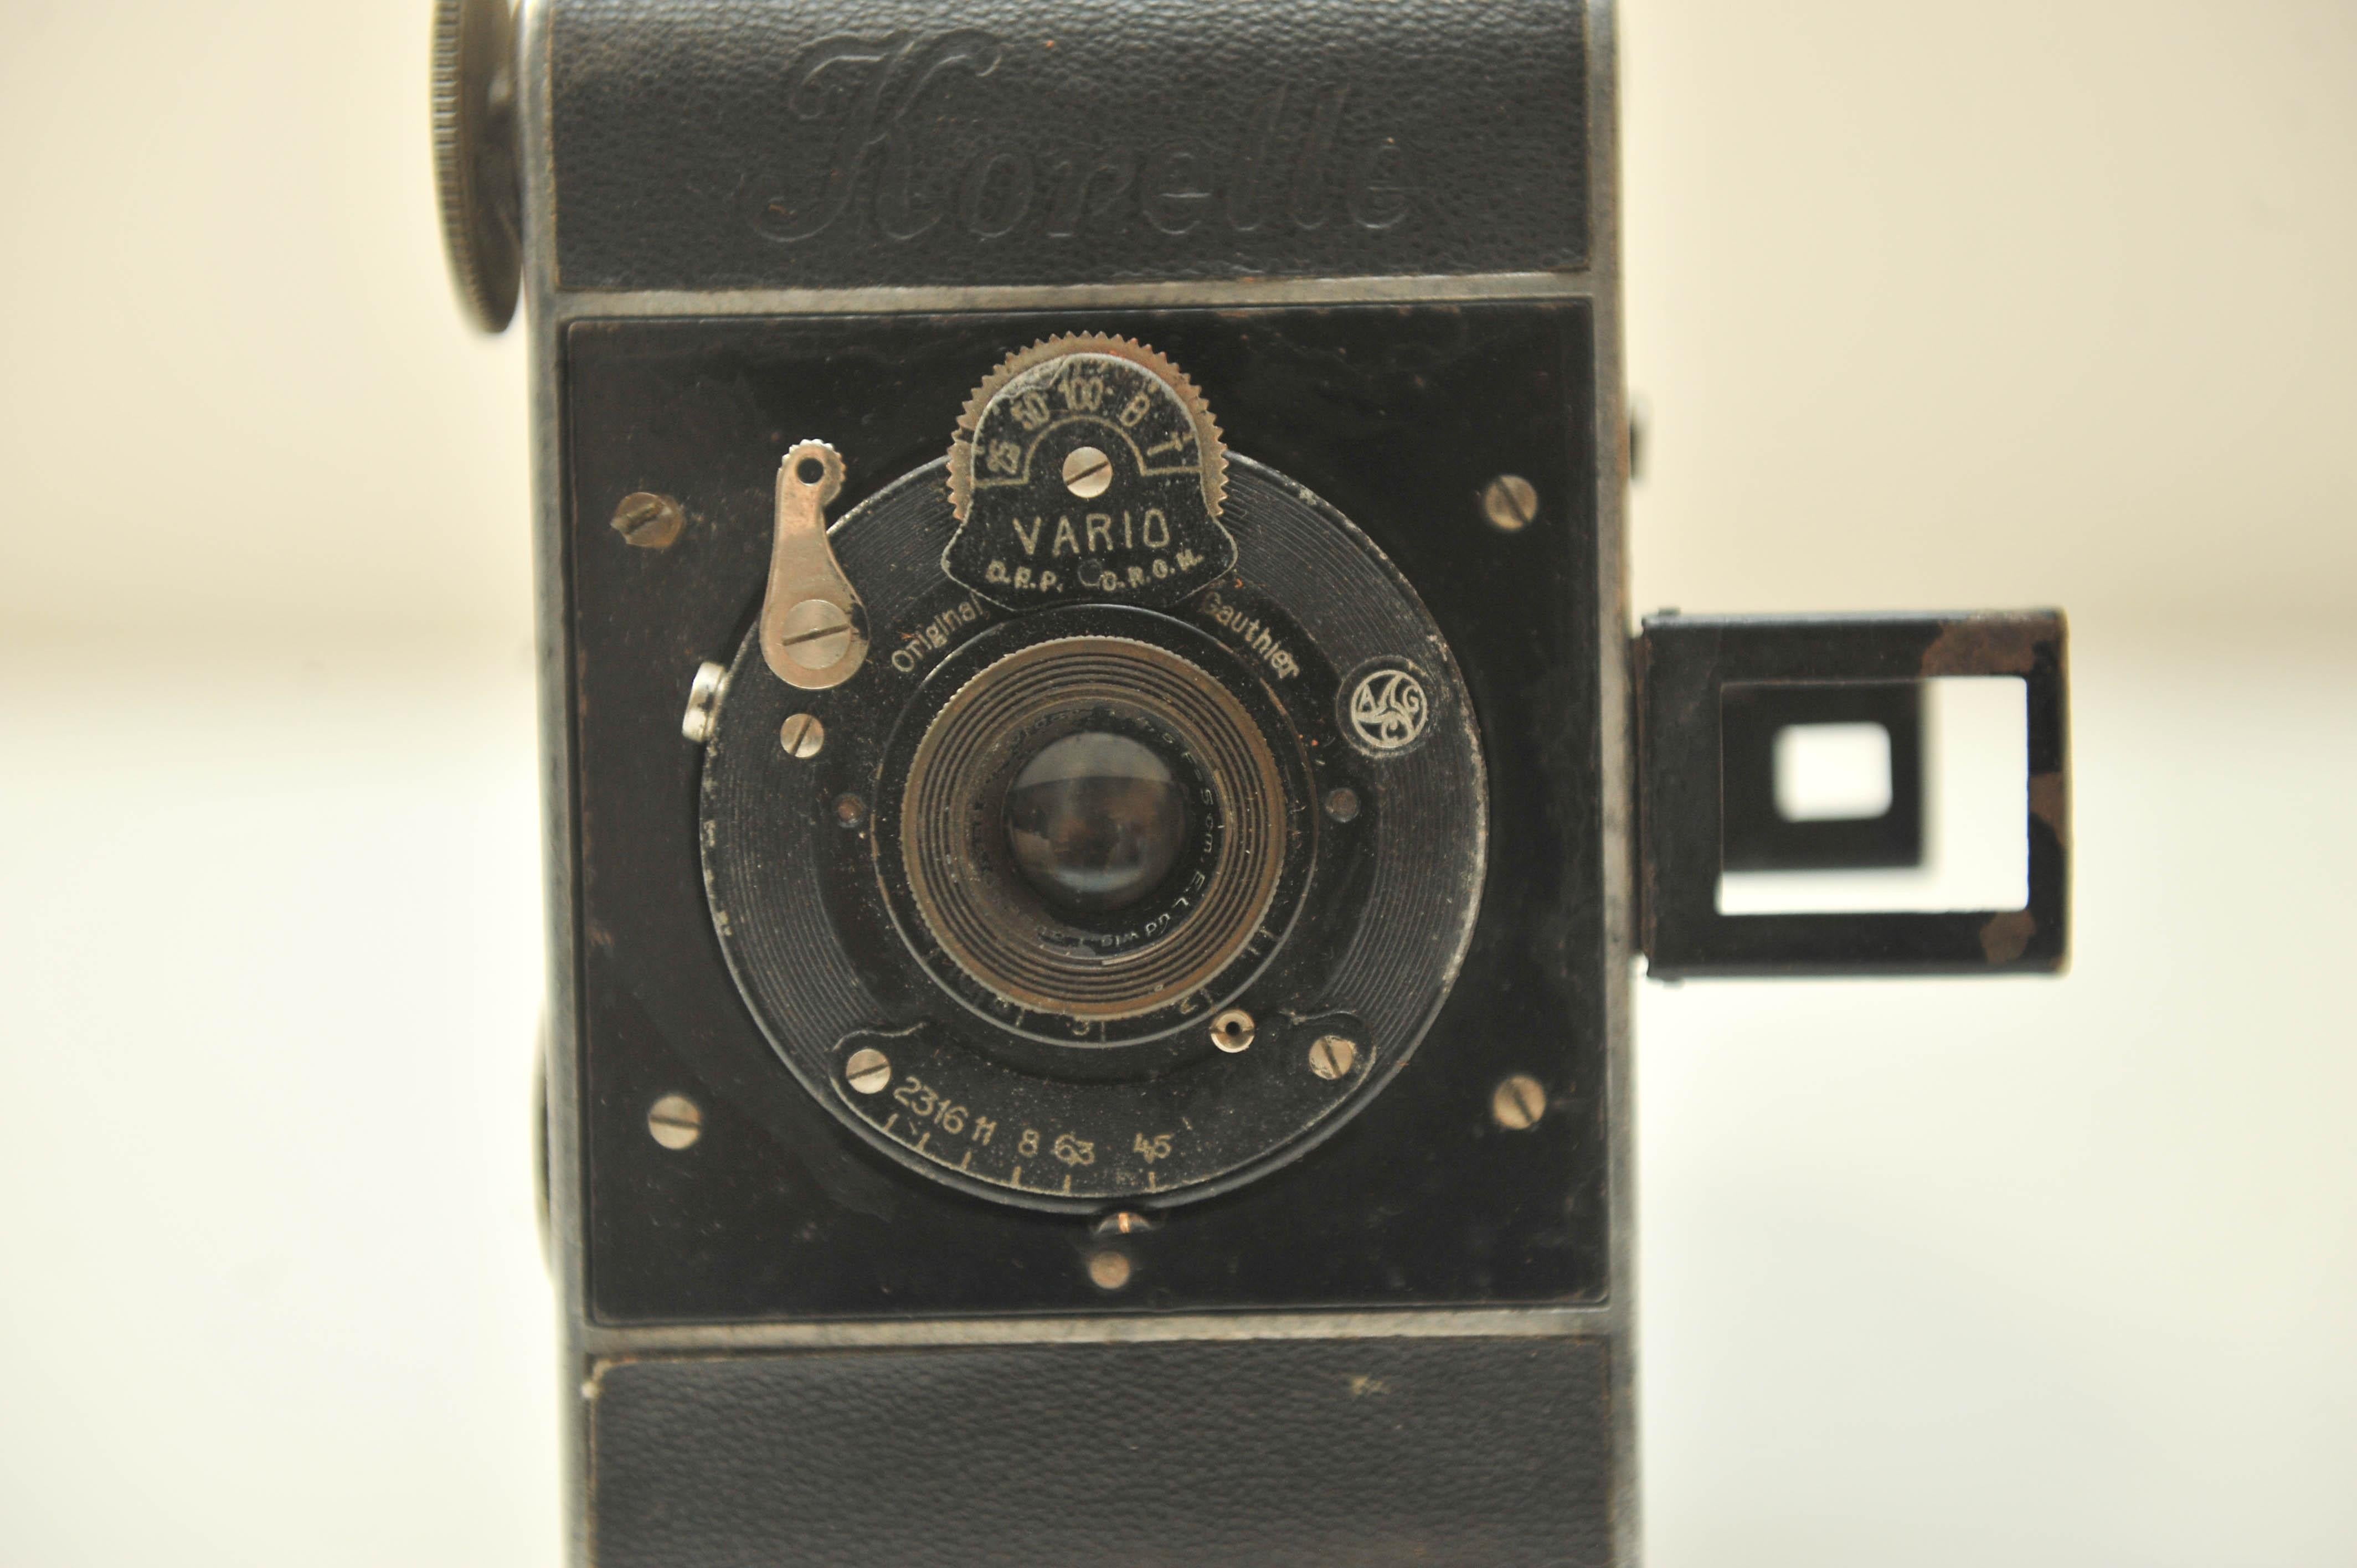 Kochmann Korelle Art Deco German Camera with Vario Leaf Shutter by Gauthier In Fair Condition For Sale In High Wycombe, GB